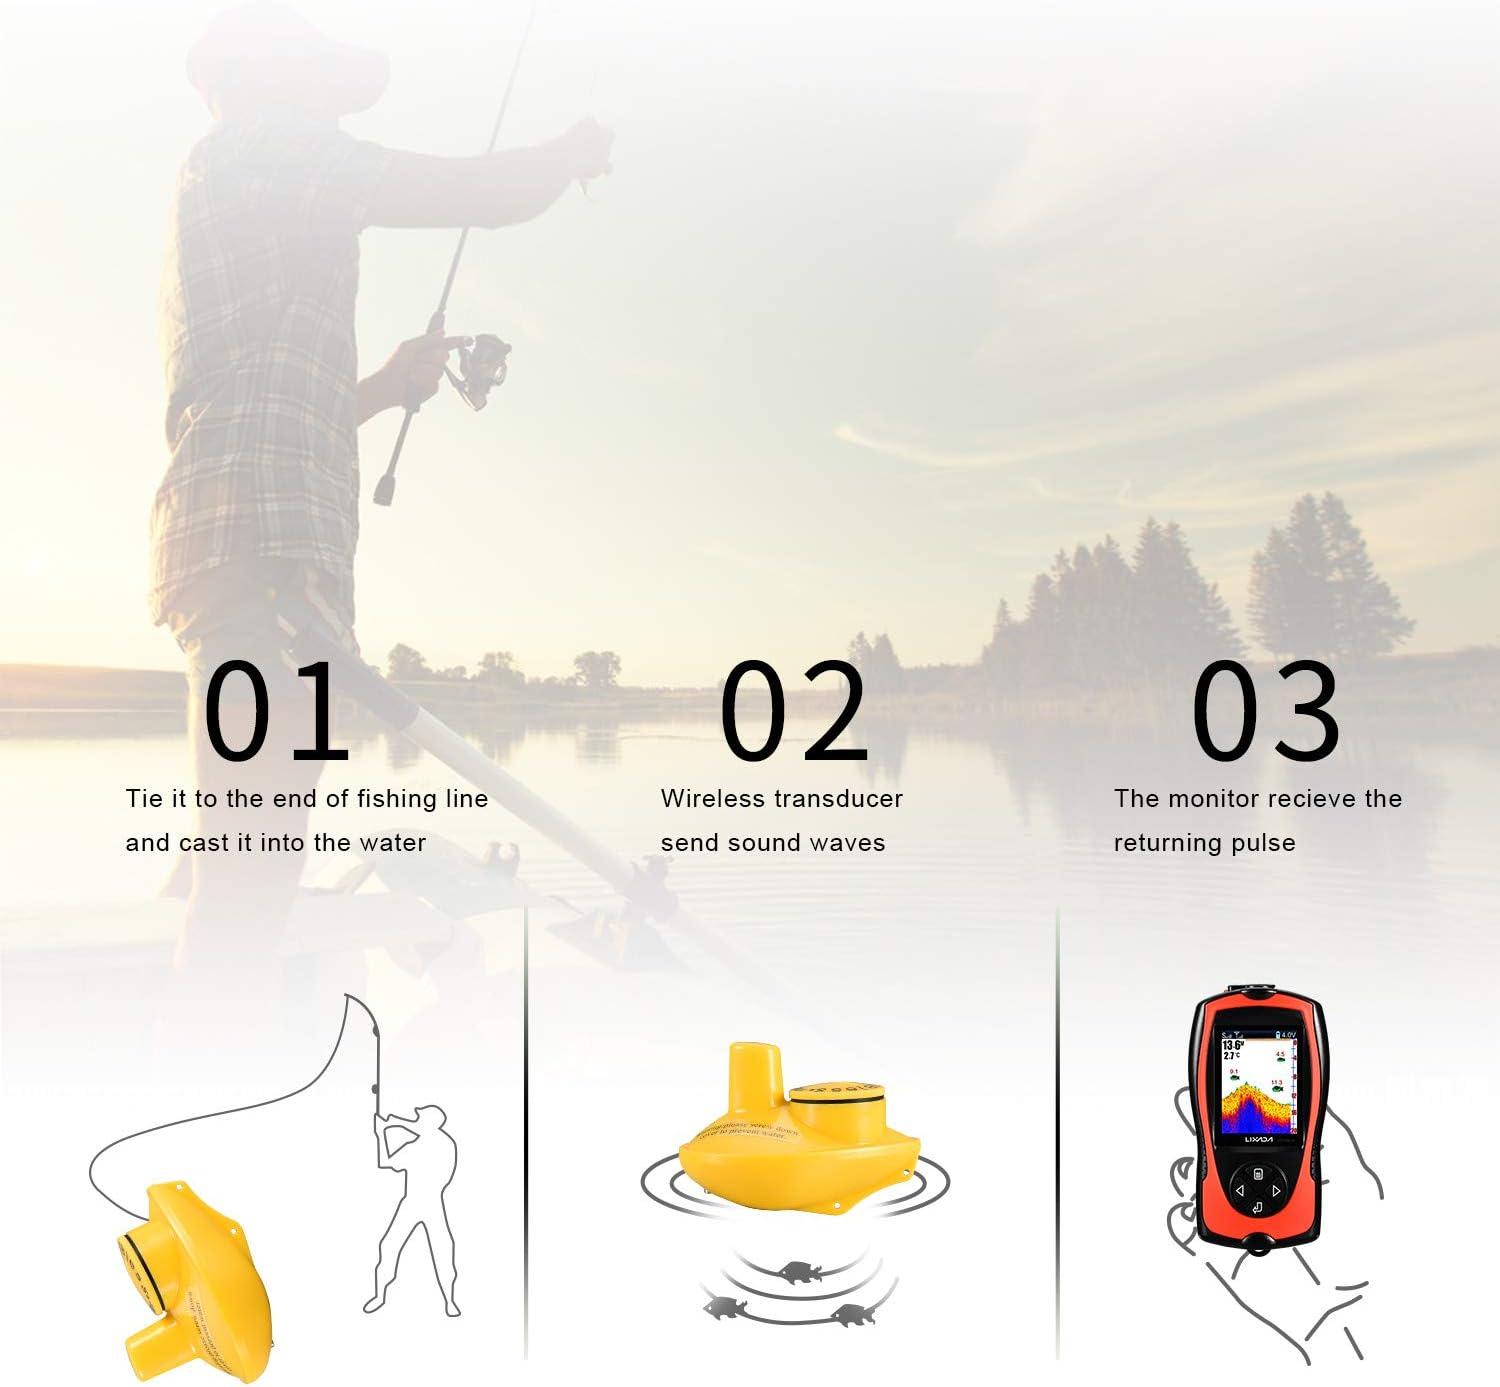 LUCKY Kayak Wireless Fish Finder Portable Fish Depth Finder for